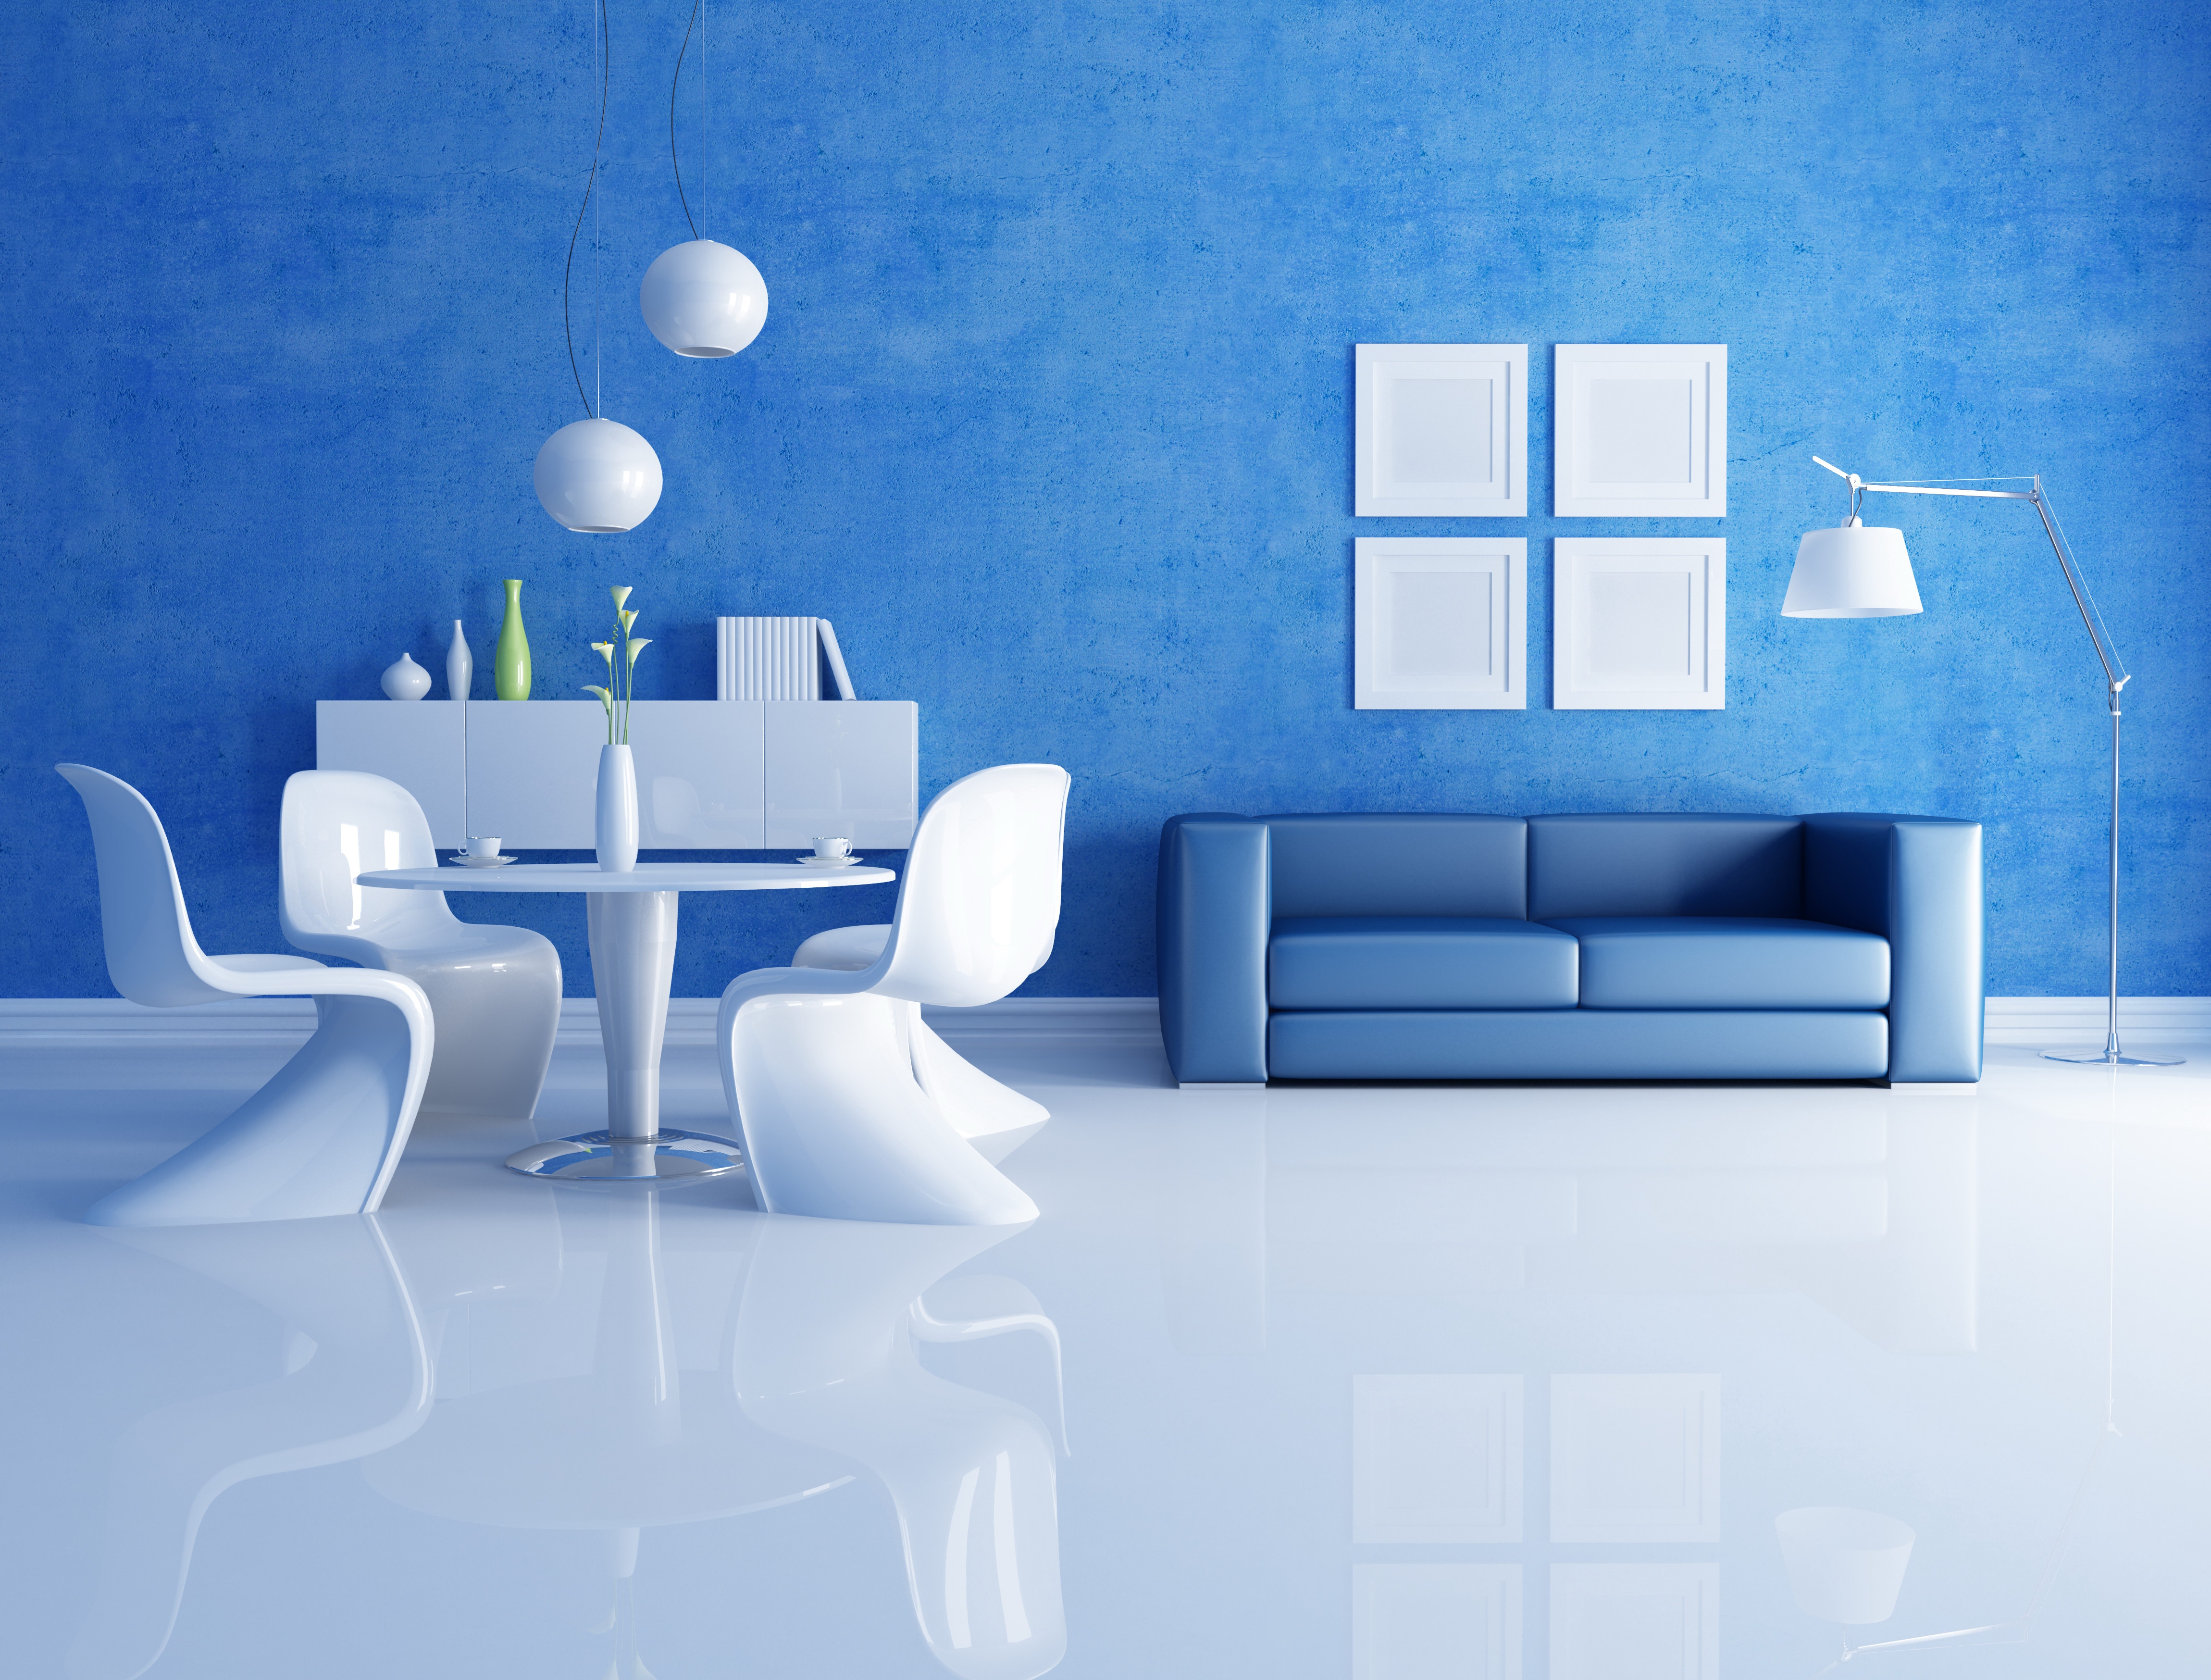 Interior Background Images, HD Pictures For Free Vectors Download -  Lovepik.com